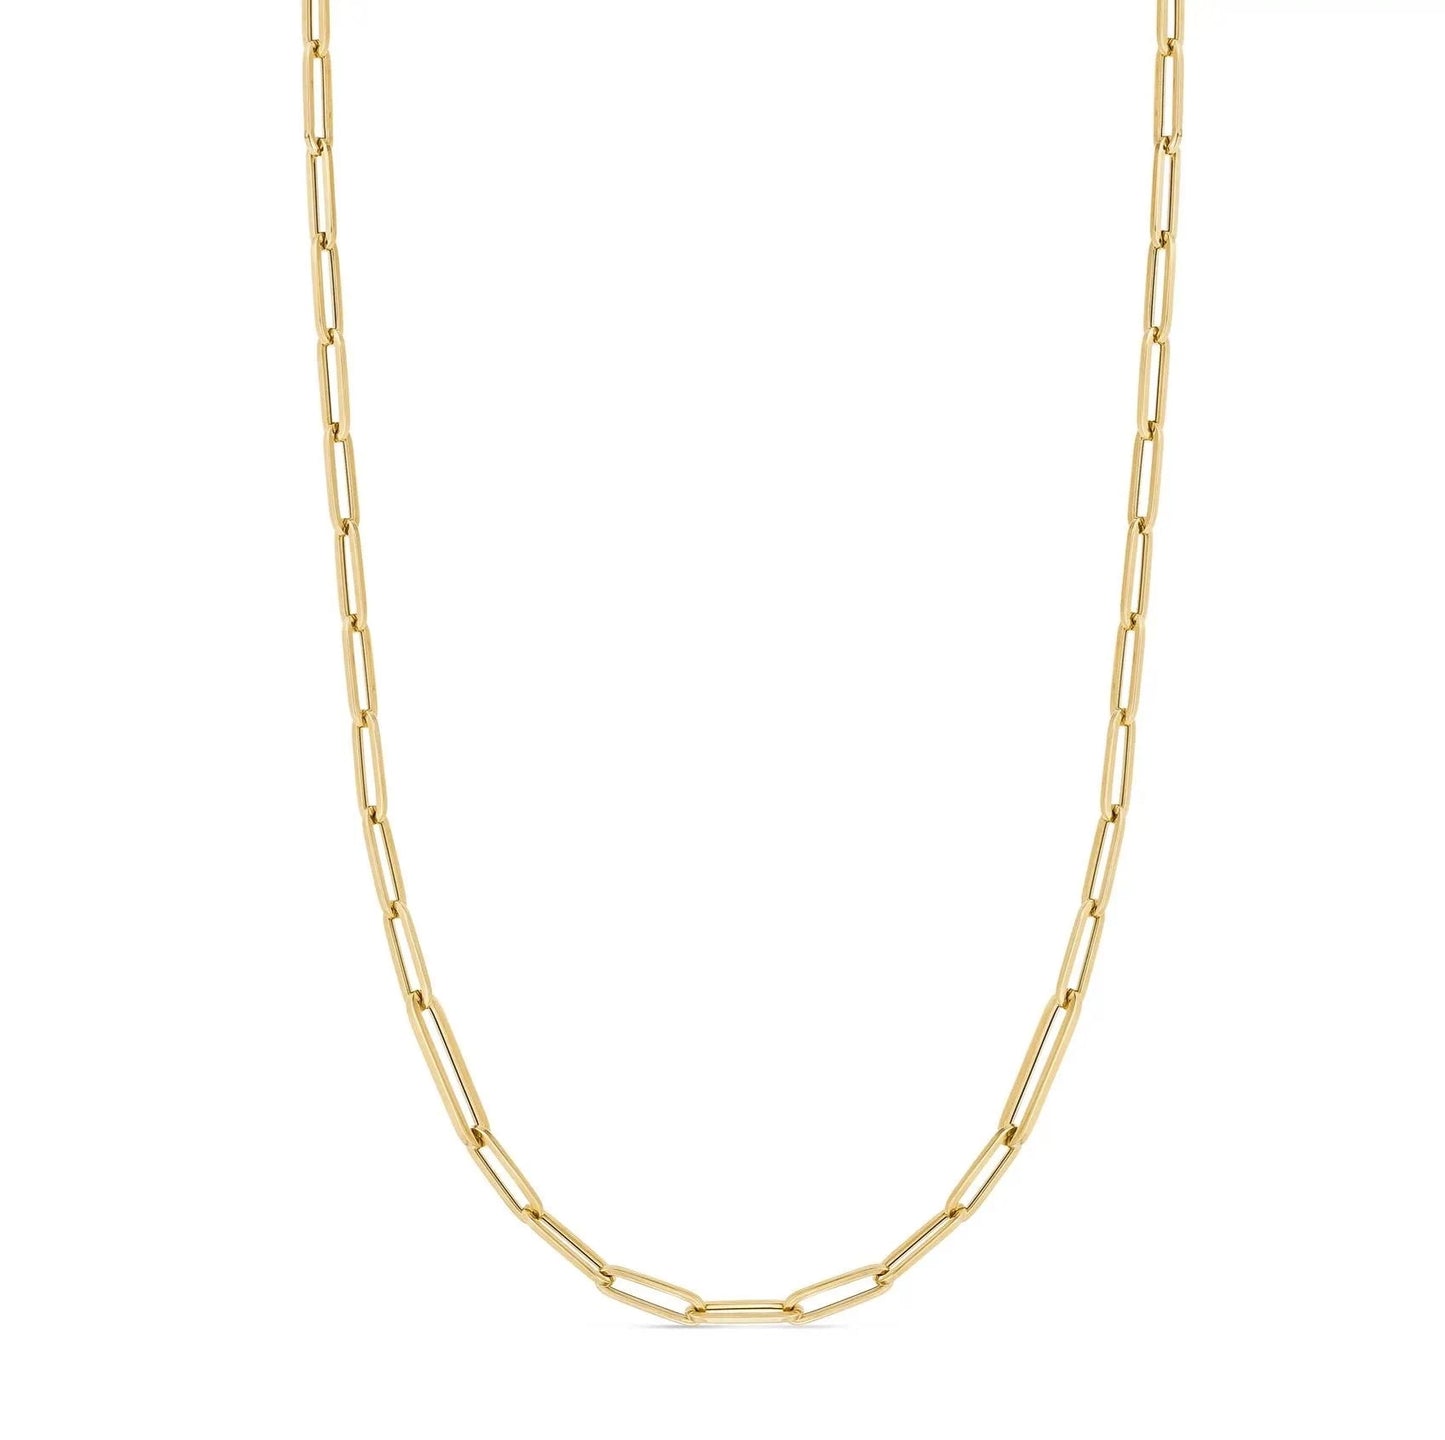 Ladies Paperclip link Necklace - 18K Yellow Gold over Solid Sterling Silver (925)